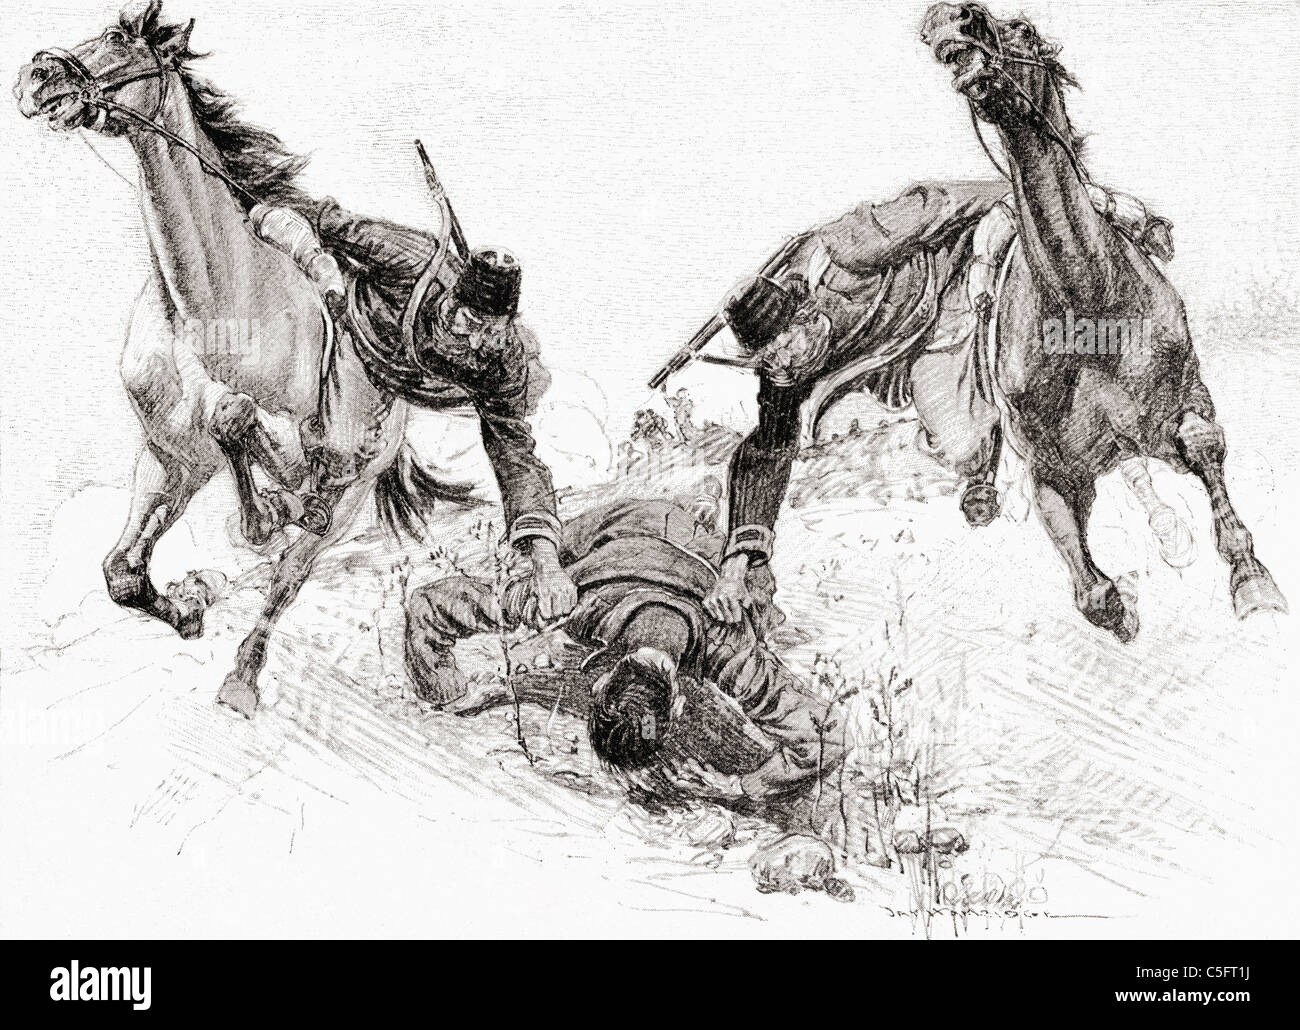 Cossack soldiers on horseback picking up a wounded comrade. Stock Photo